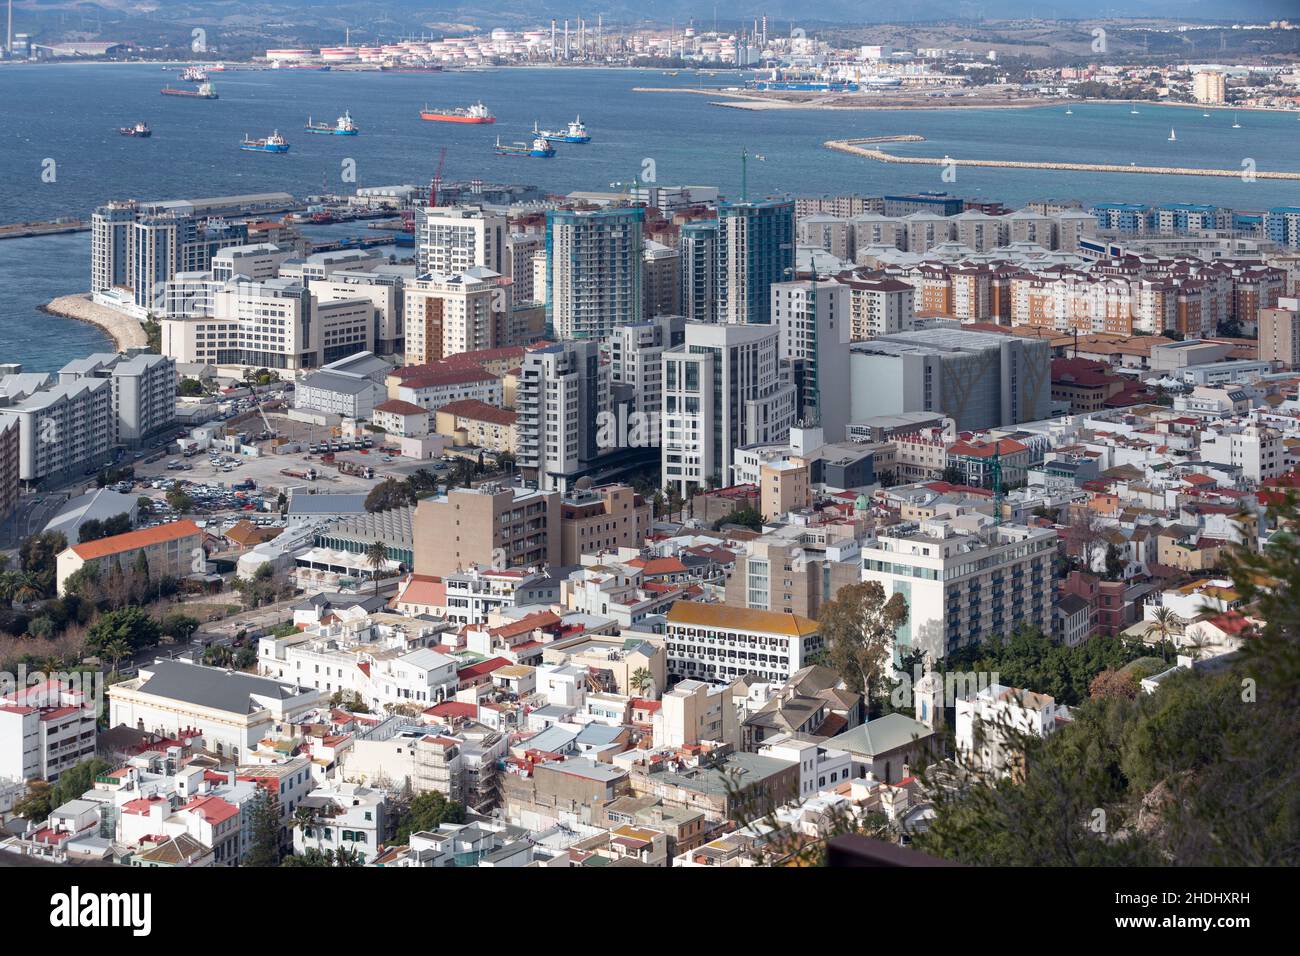 Gibraltar, United Kingdom - December 10, 2021: General view of the city of Gibraltar Stock Photo